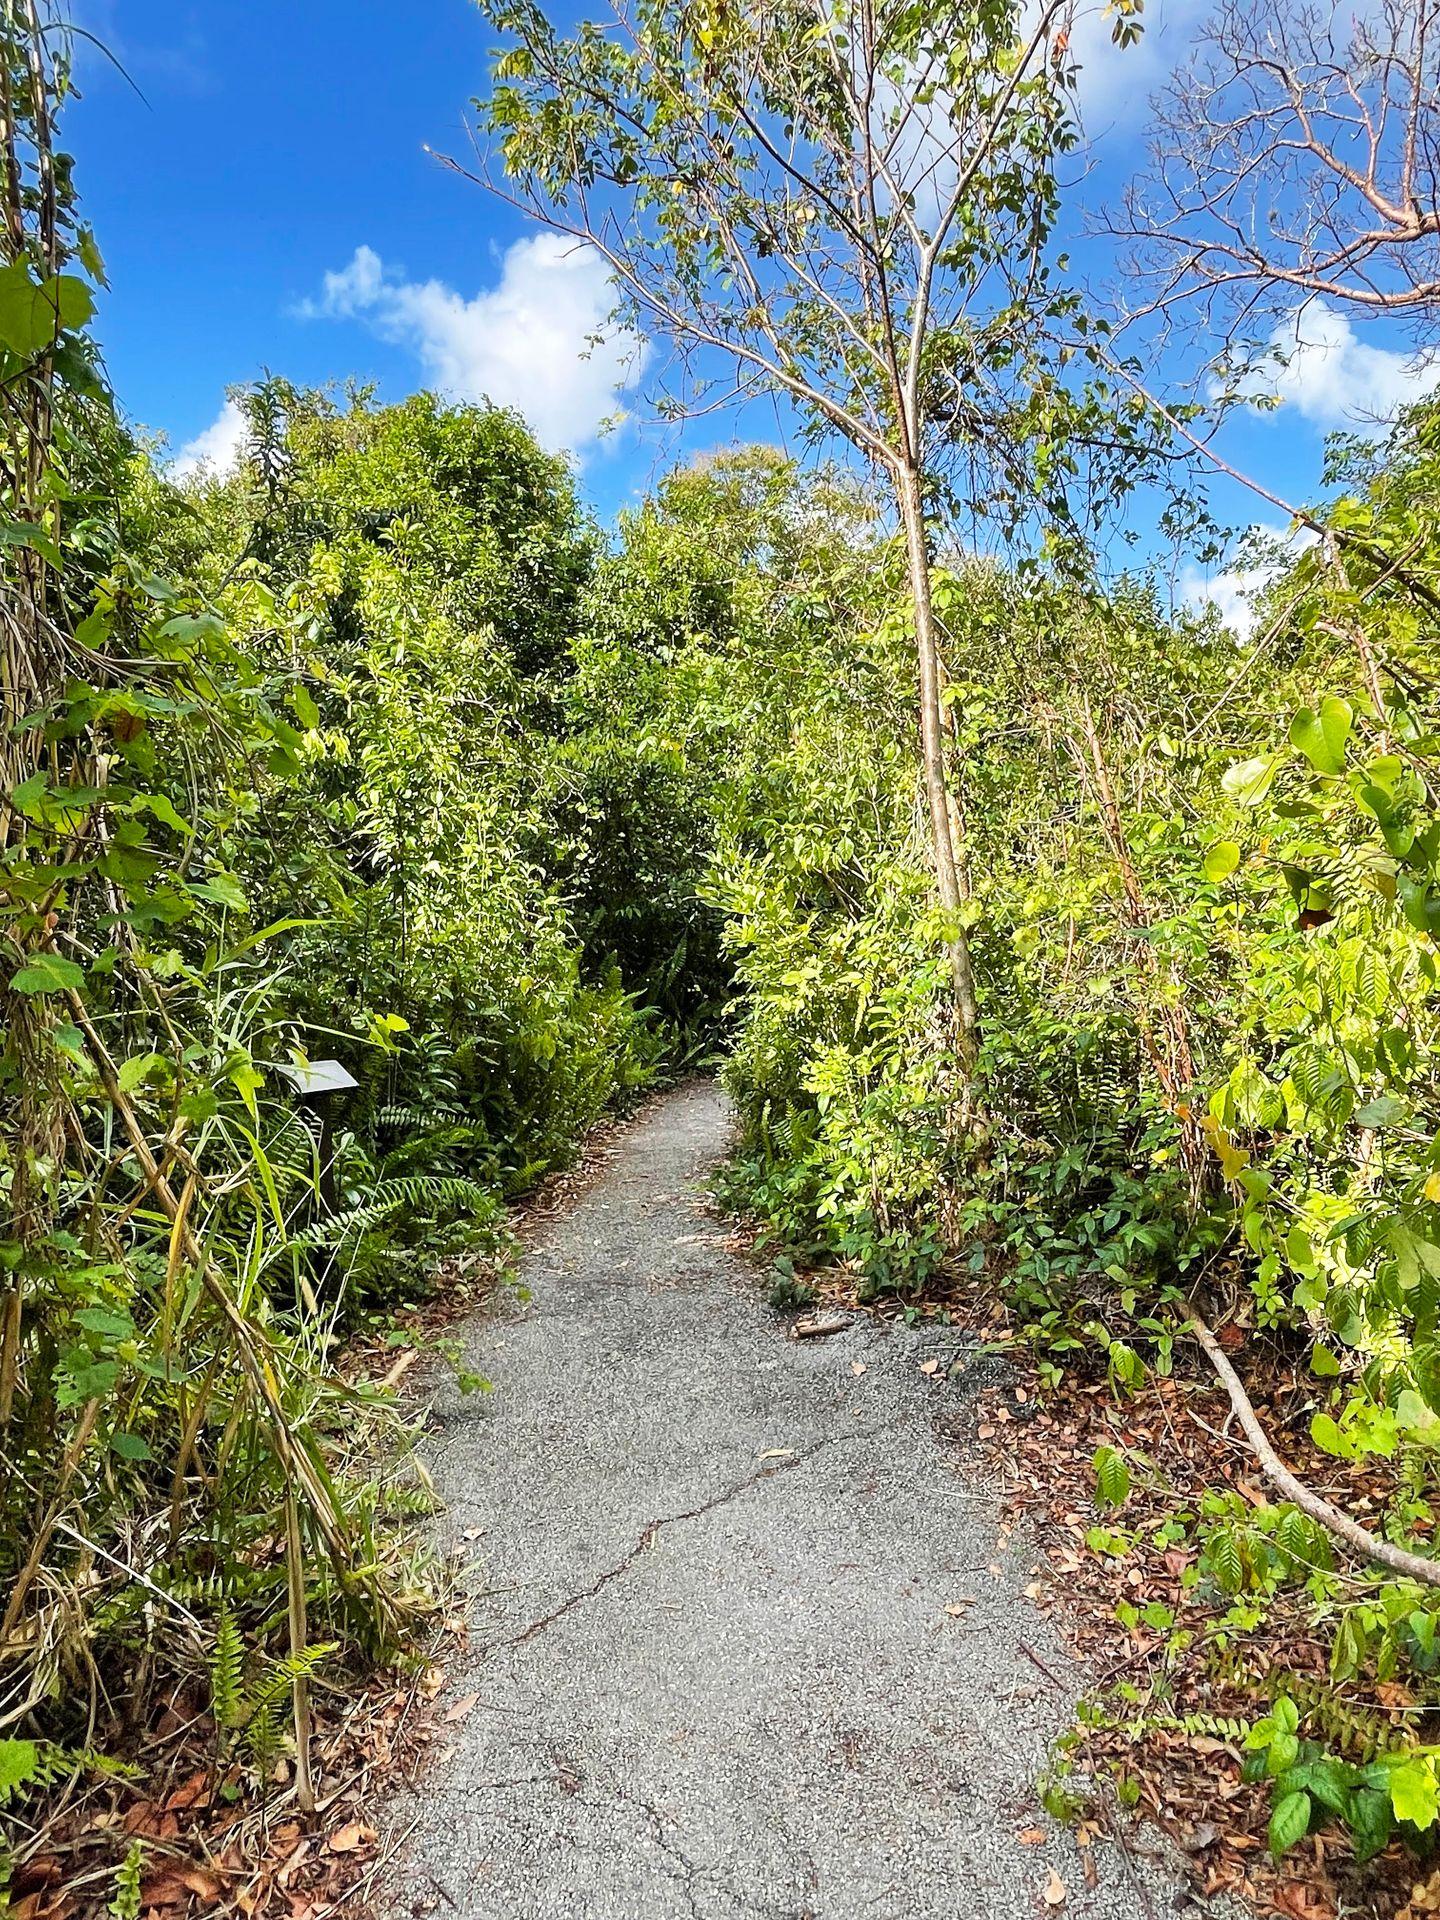 A flat trail leads through an area of trees and greenery.